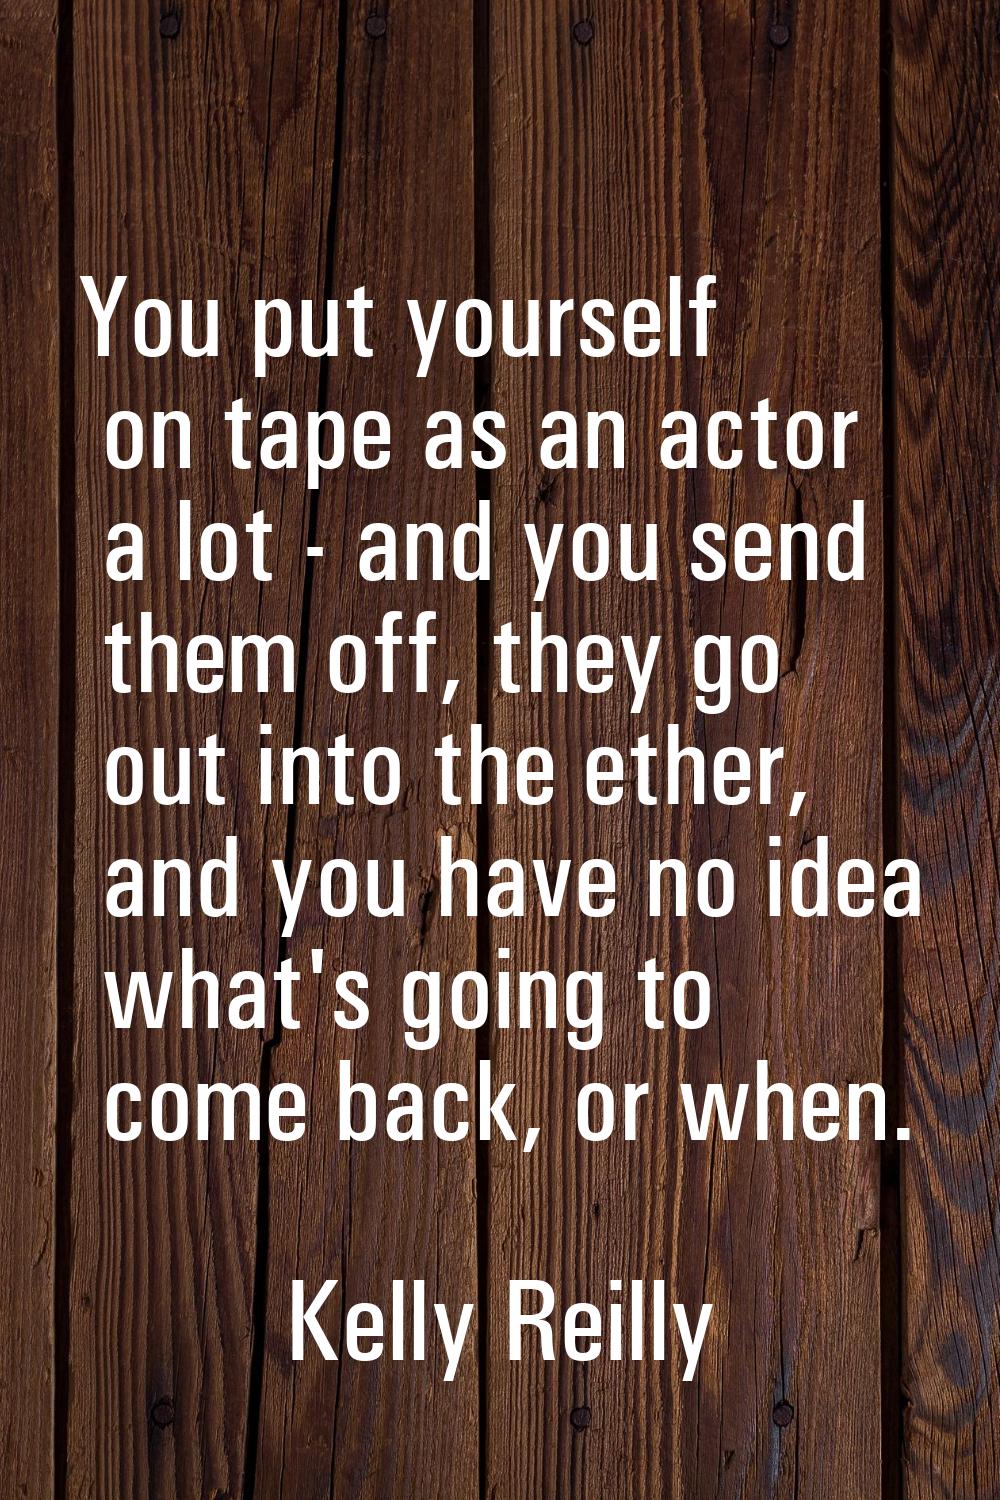 You put yourself on tape as an actor a lot - and you send them off, they go out into the ether, and